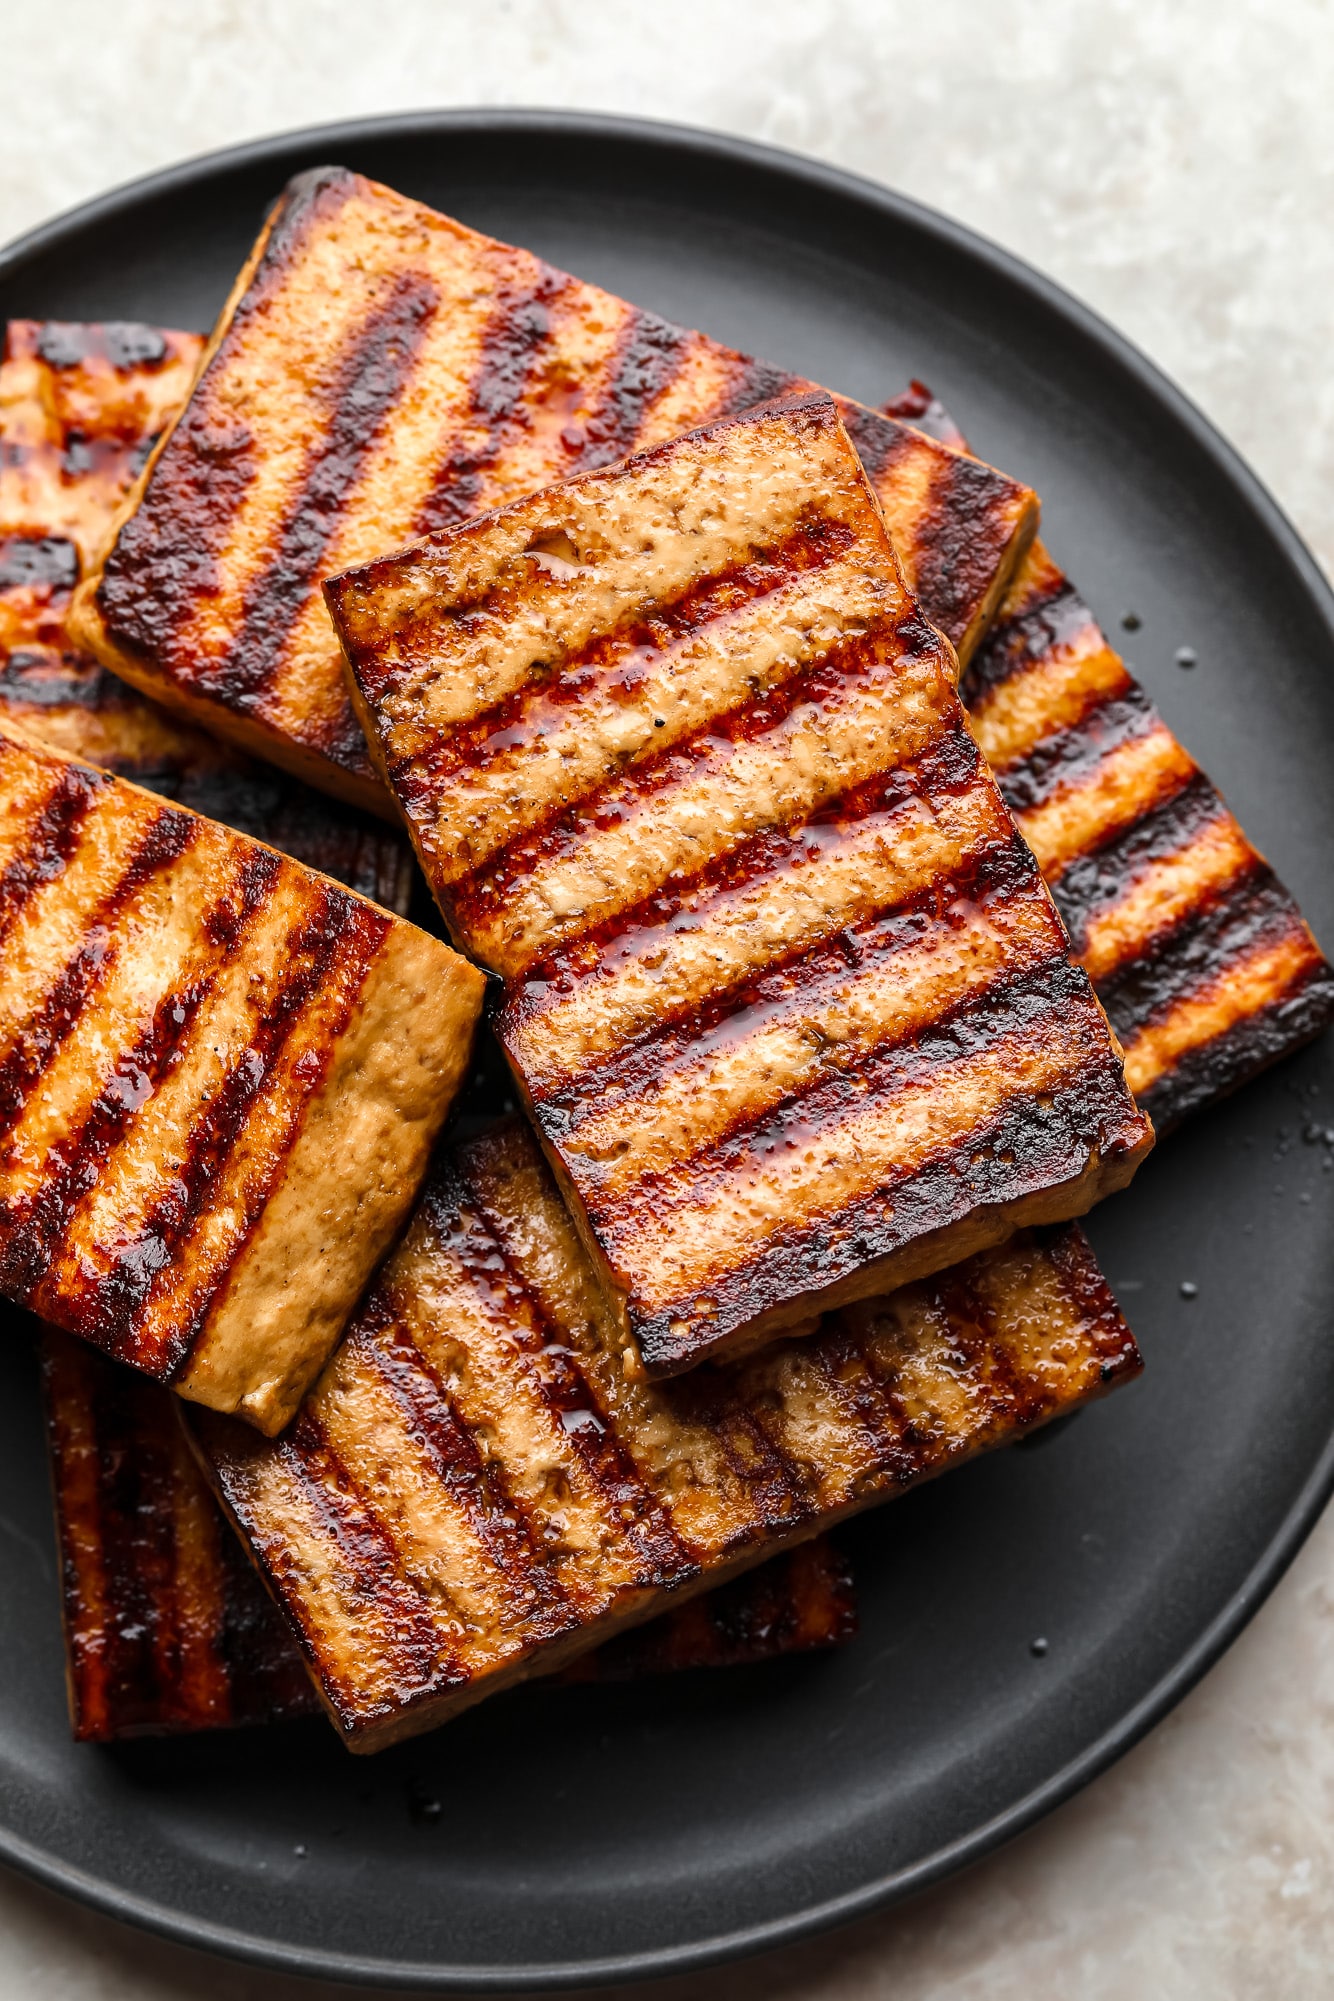 a pile of grilled tofu pieces on a black plate.